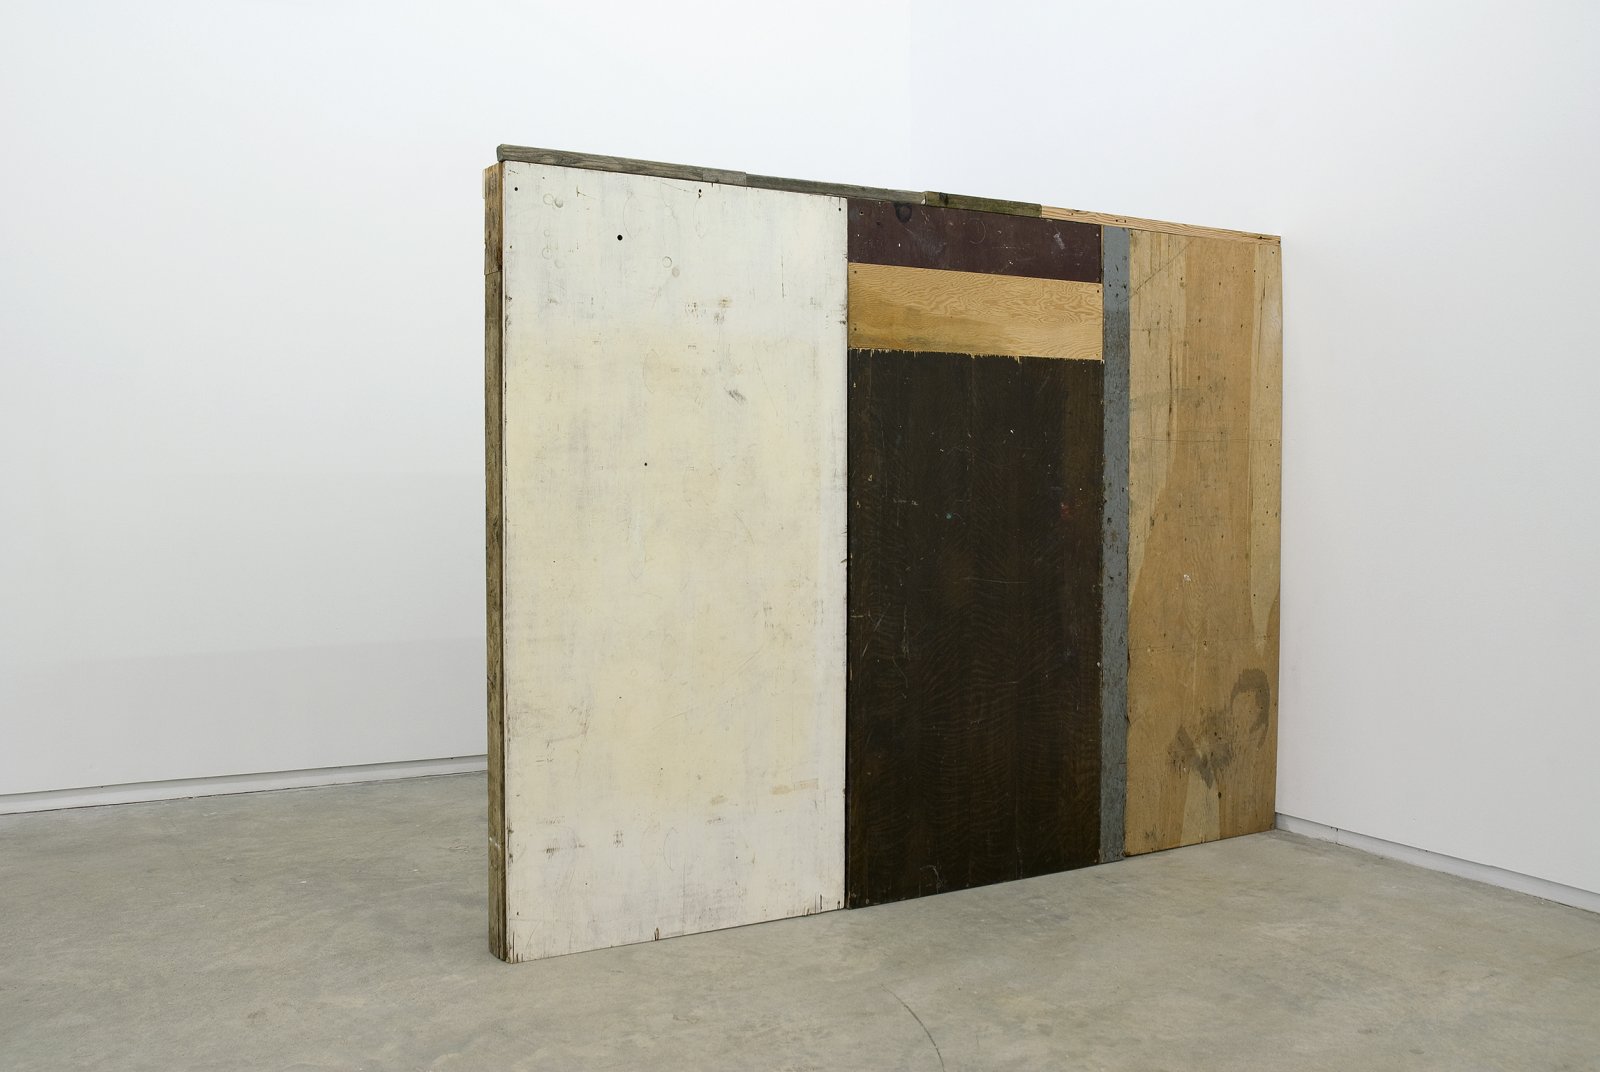 Gareth Moore, Piss Wall from Uncertain Pilgrimage, 2009, found wood, tile, 73 x 100 x 5 in. (186 x 253 x 13 cm)   by Ashes Withyman